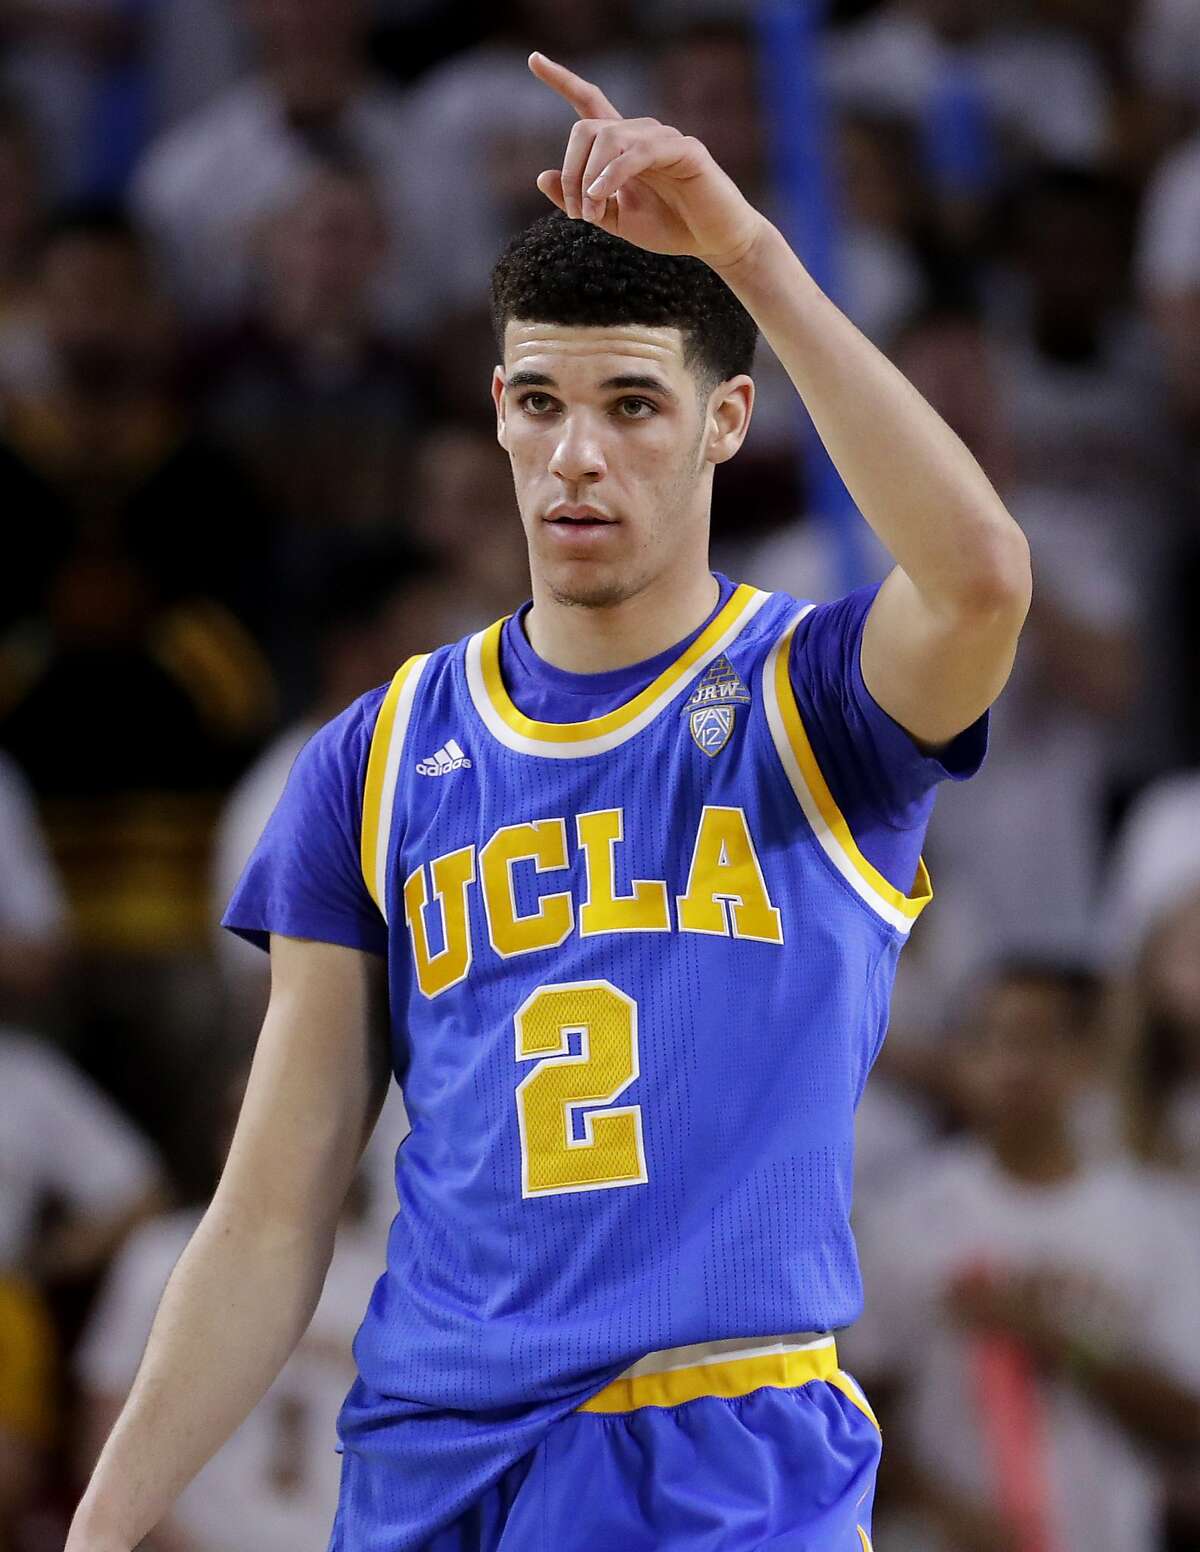 2. Lakers Lonzo Ball, UCLA Position/Height: PG/ 6-6 Despite signs that the Lakers have second-guessed keeping Ball in L.A., Magic Johnson is likely to consider him a fit with his young talent on hand, seek Showtime pace.